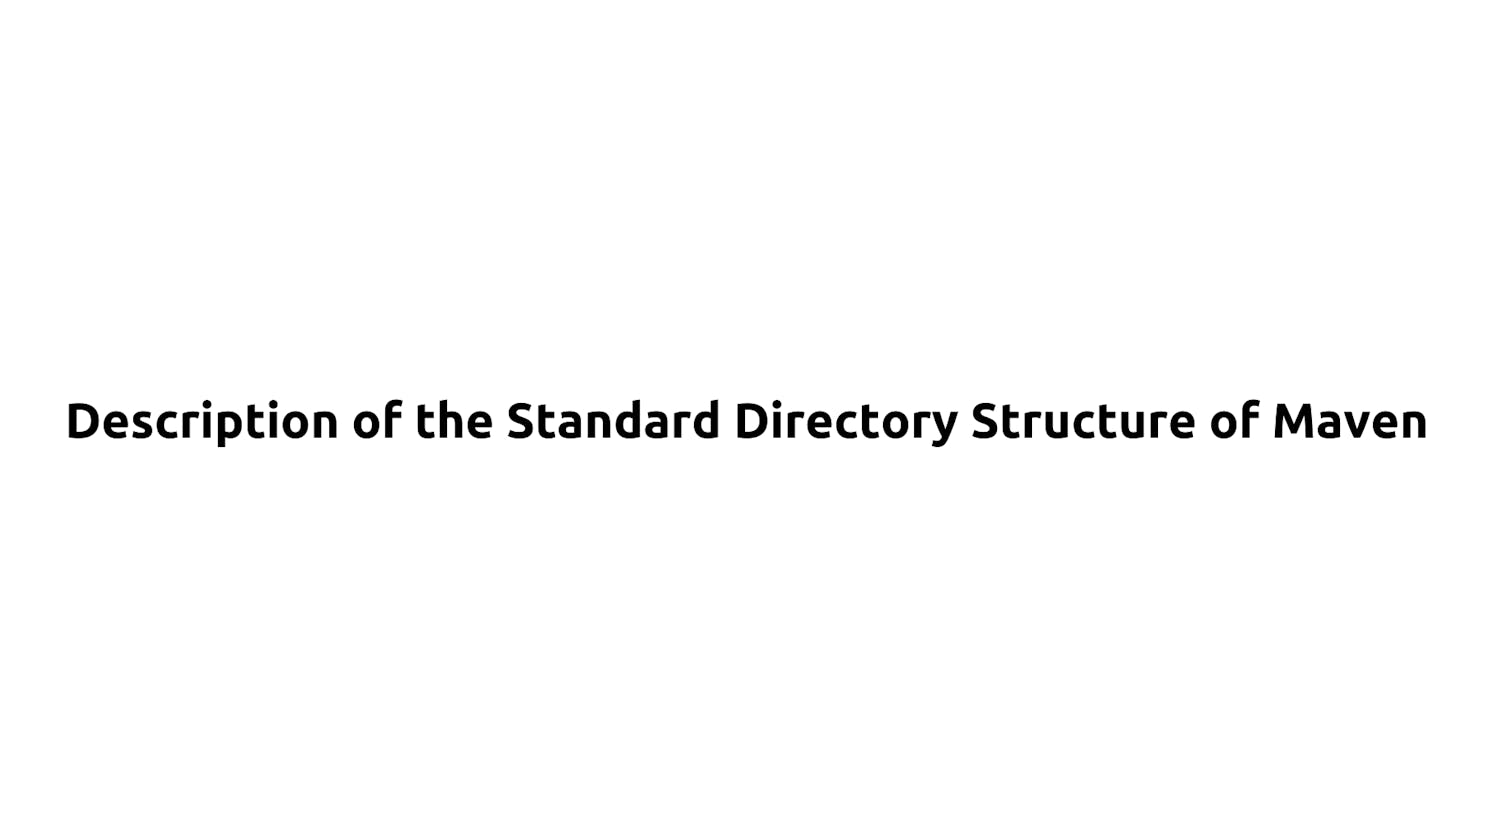 Description of the Standard Directory Structure of Maven